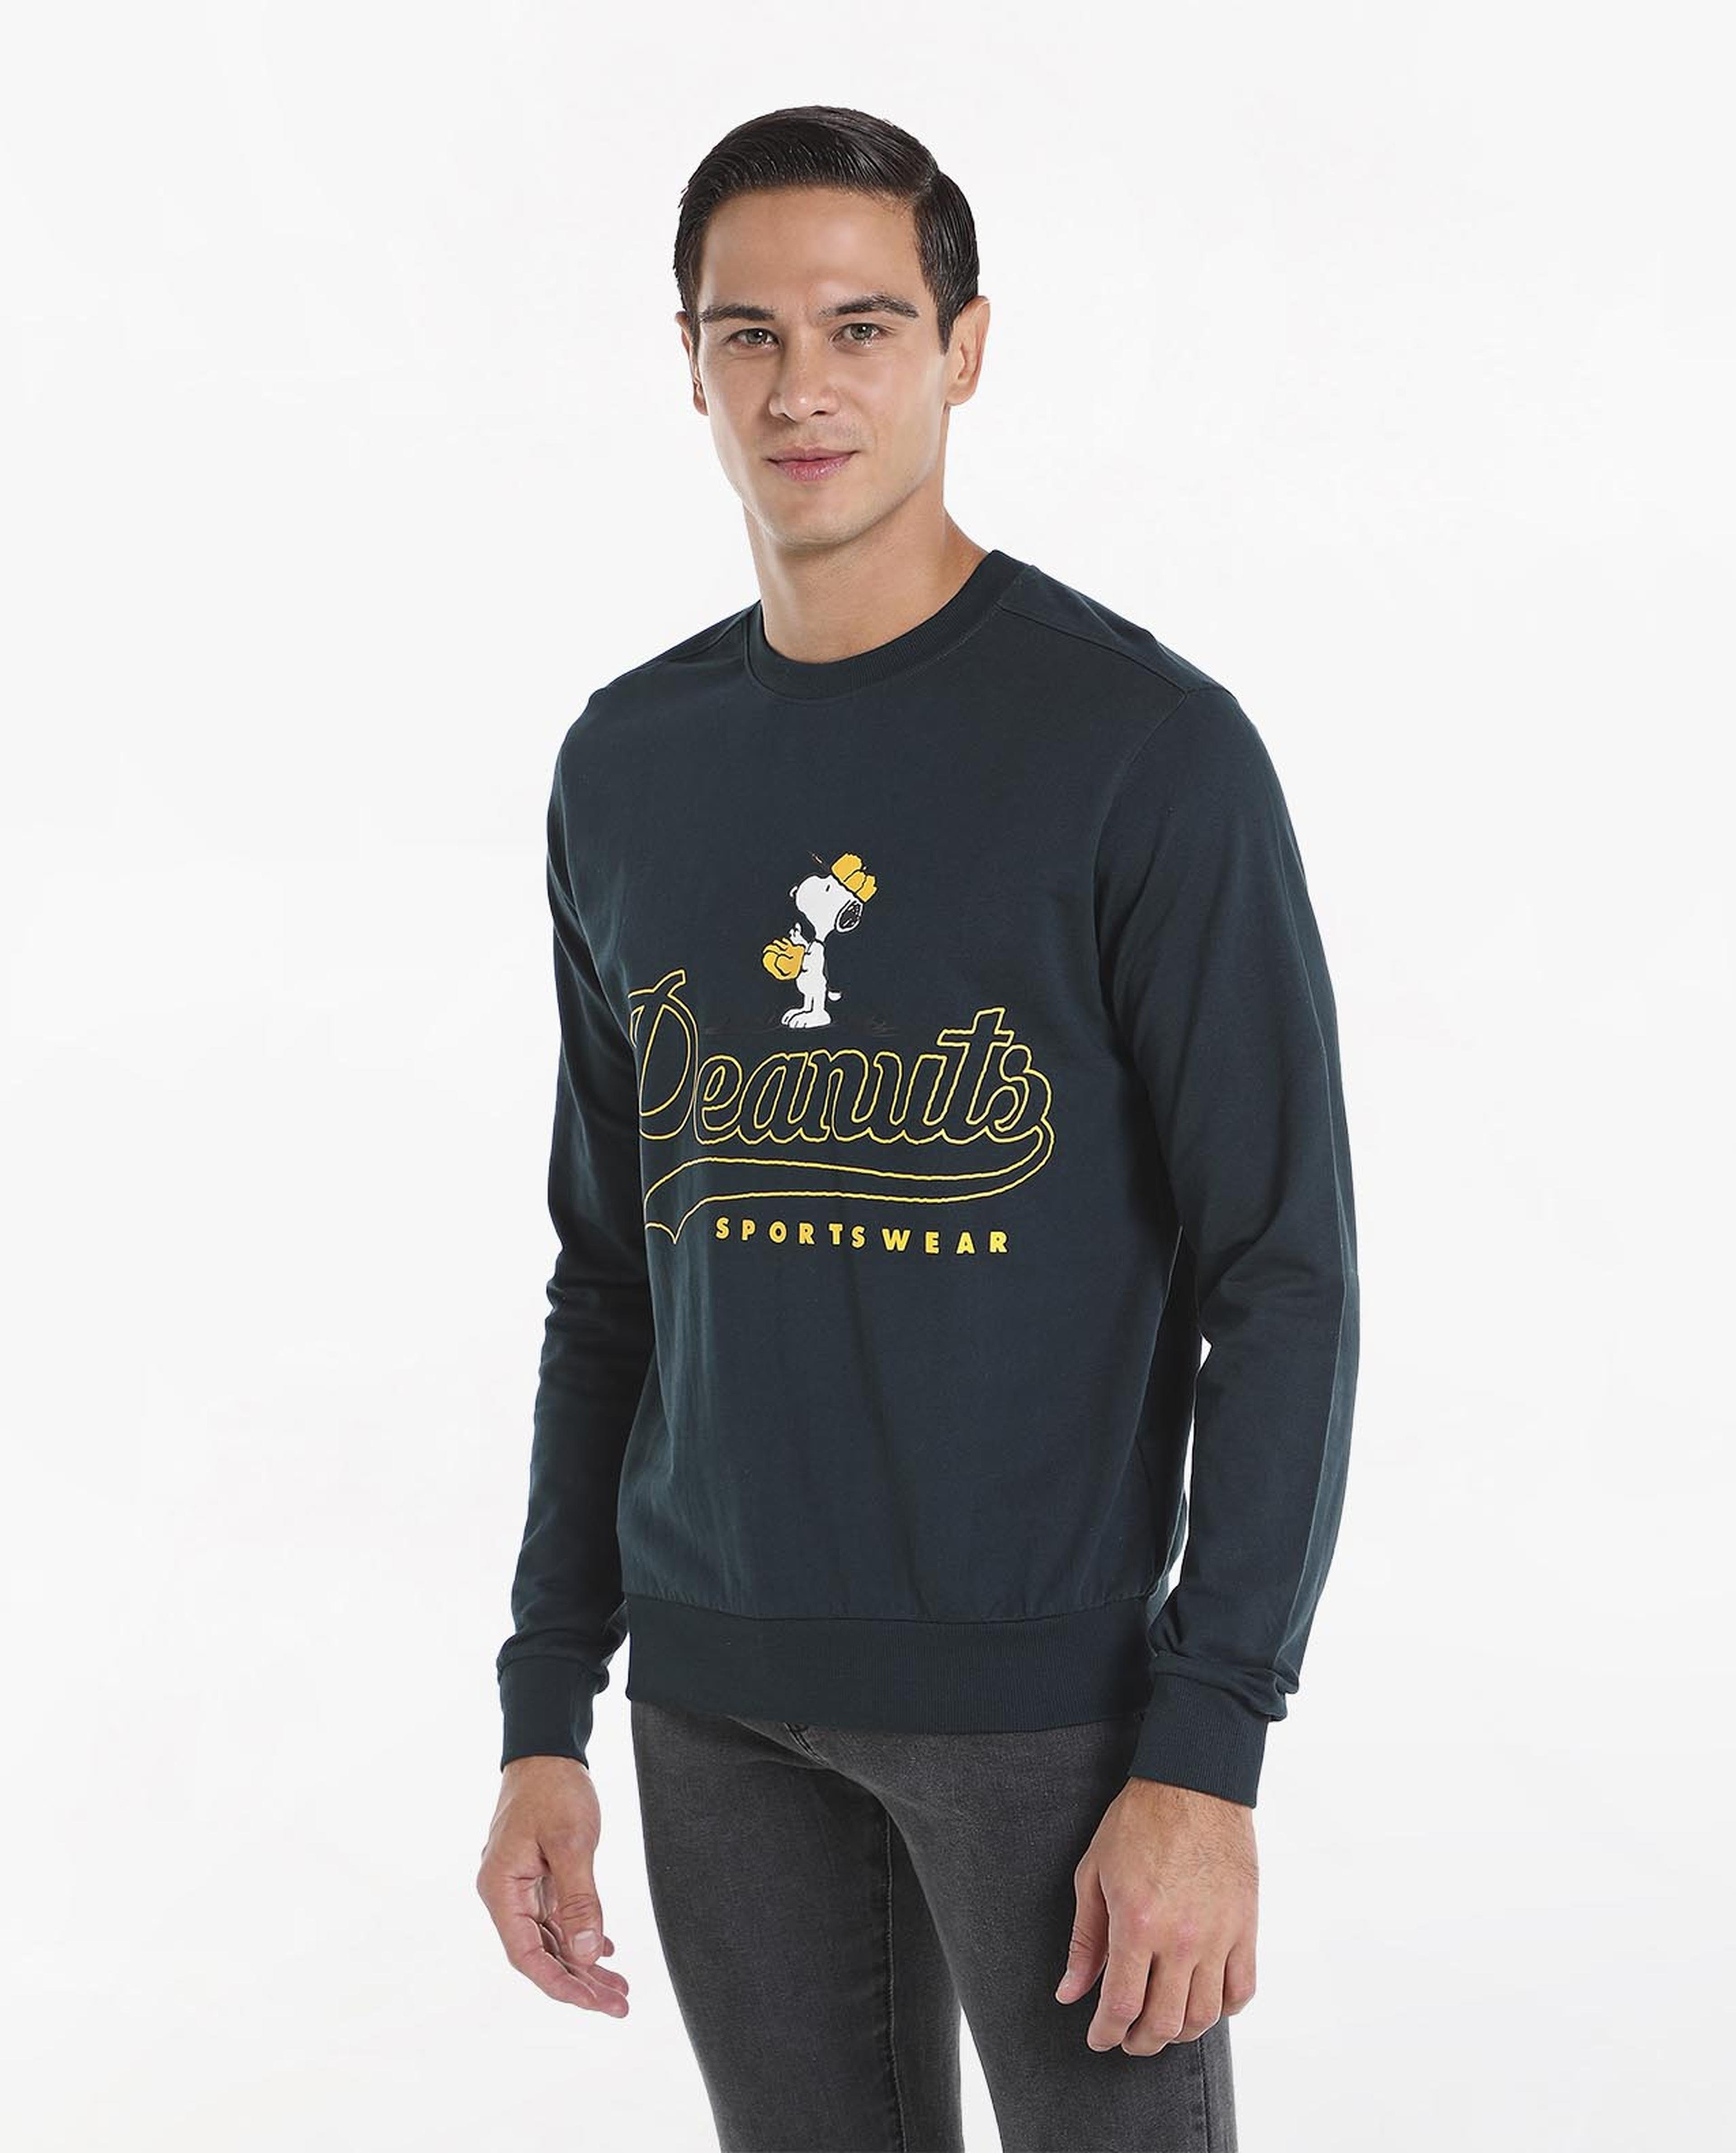 Typography Printed Sweatshirt with Round Neck and Long Sleeves